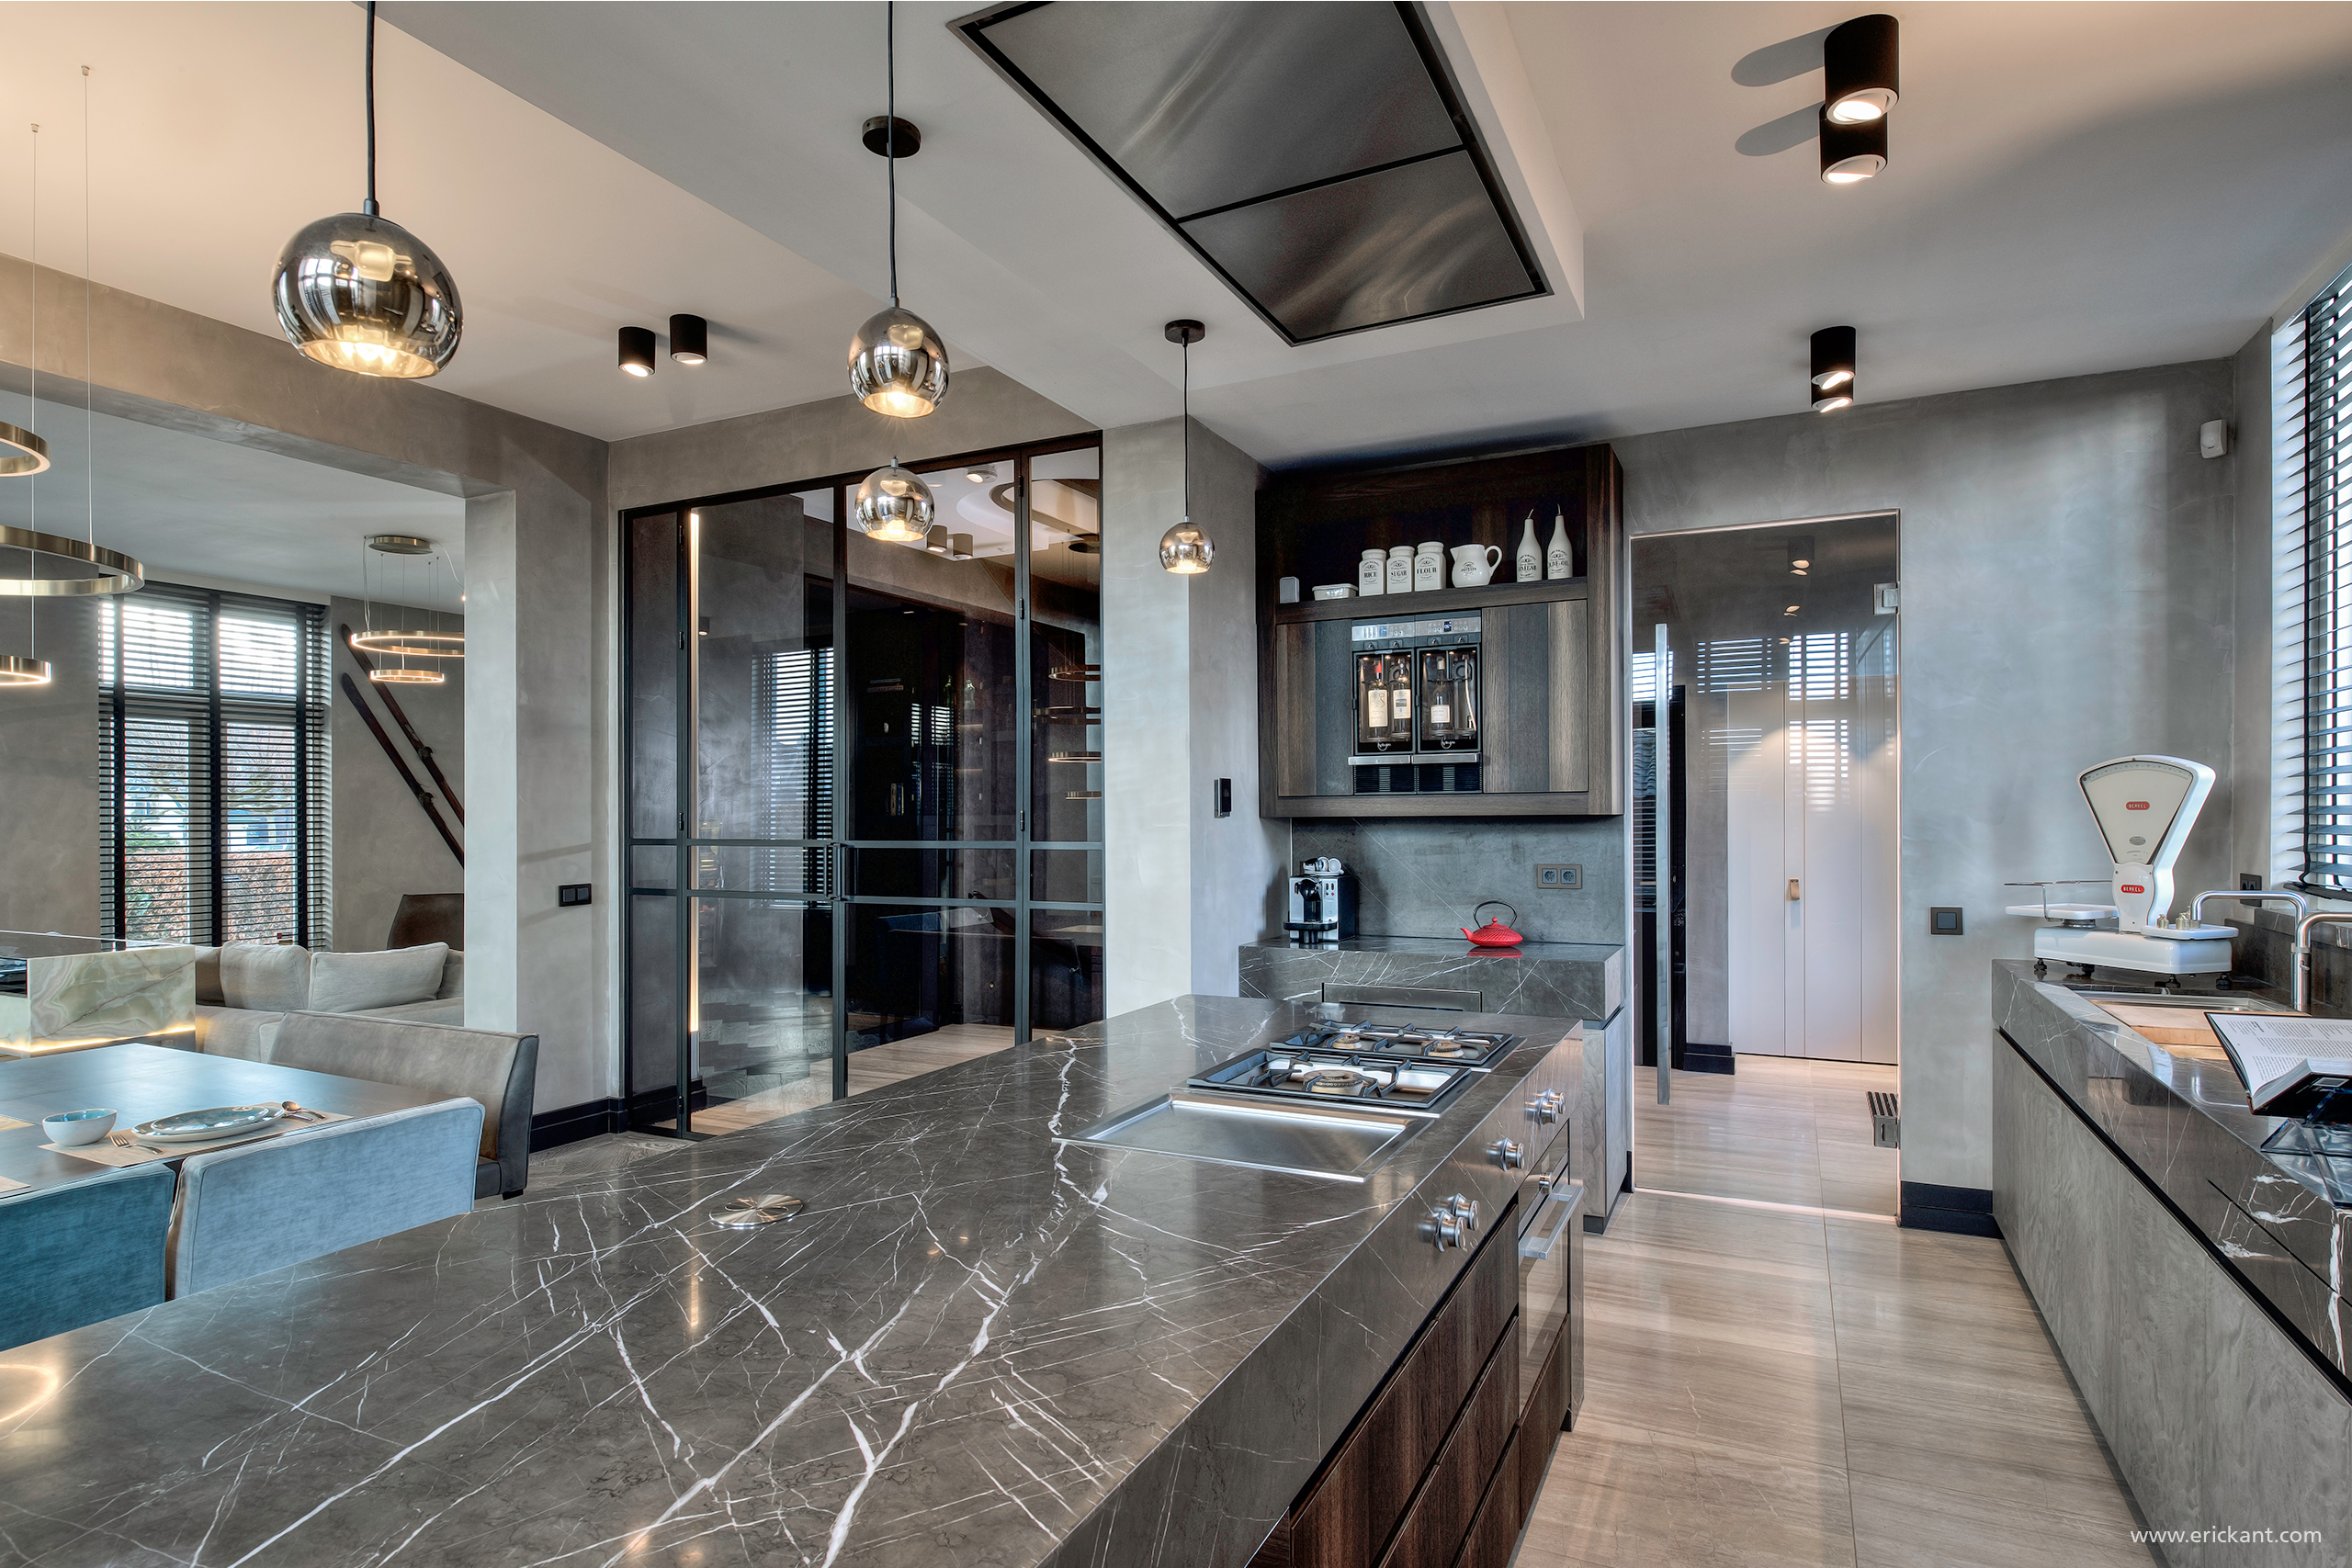 Mansion on the waterfront-kitchen-ERIC KANT.jpg